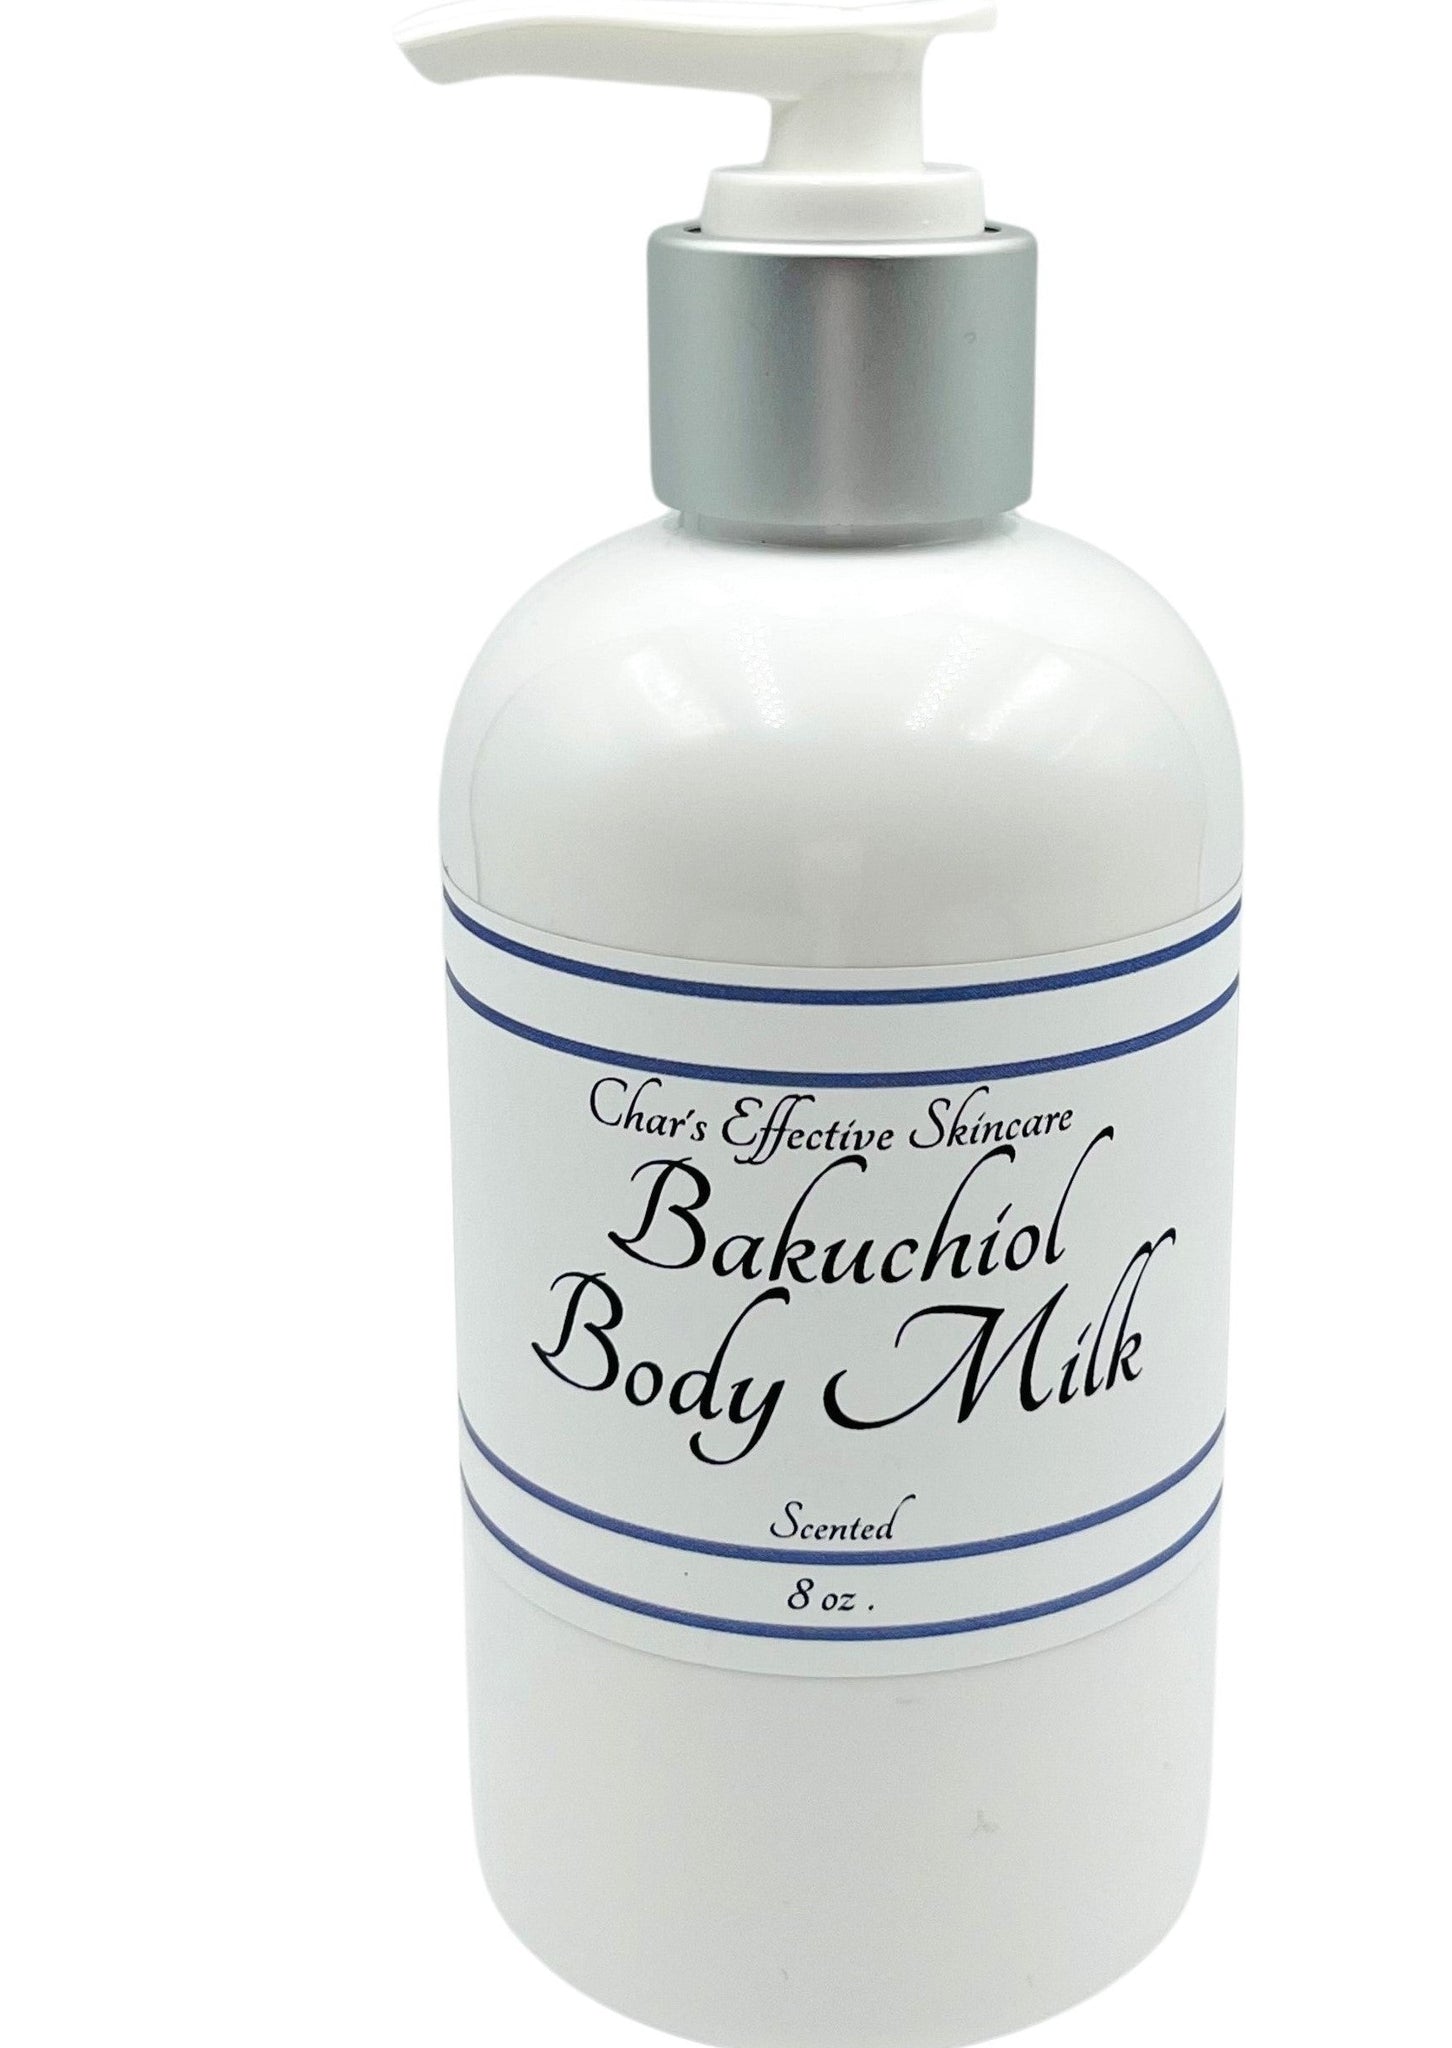 Bakuchiol Rich Body Milk/ 8oz White Bottle with white and silver treatment pump top/luxurious moisturizer for Body with a lightweight feel/Char's Effectives Skincare